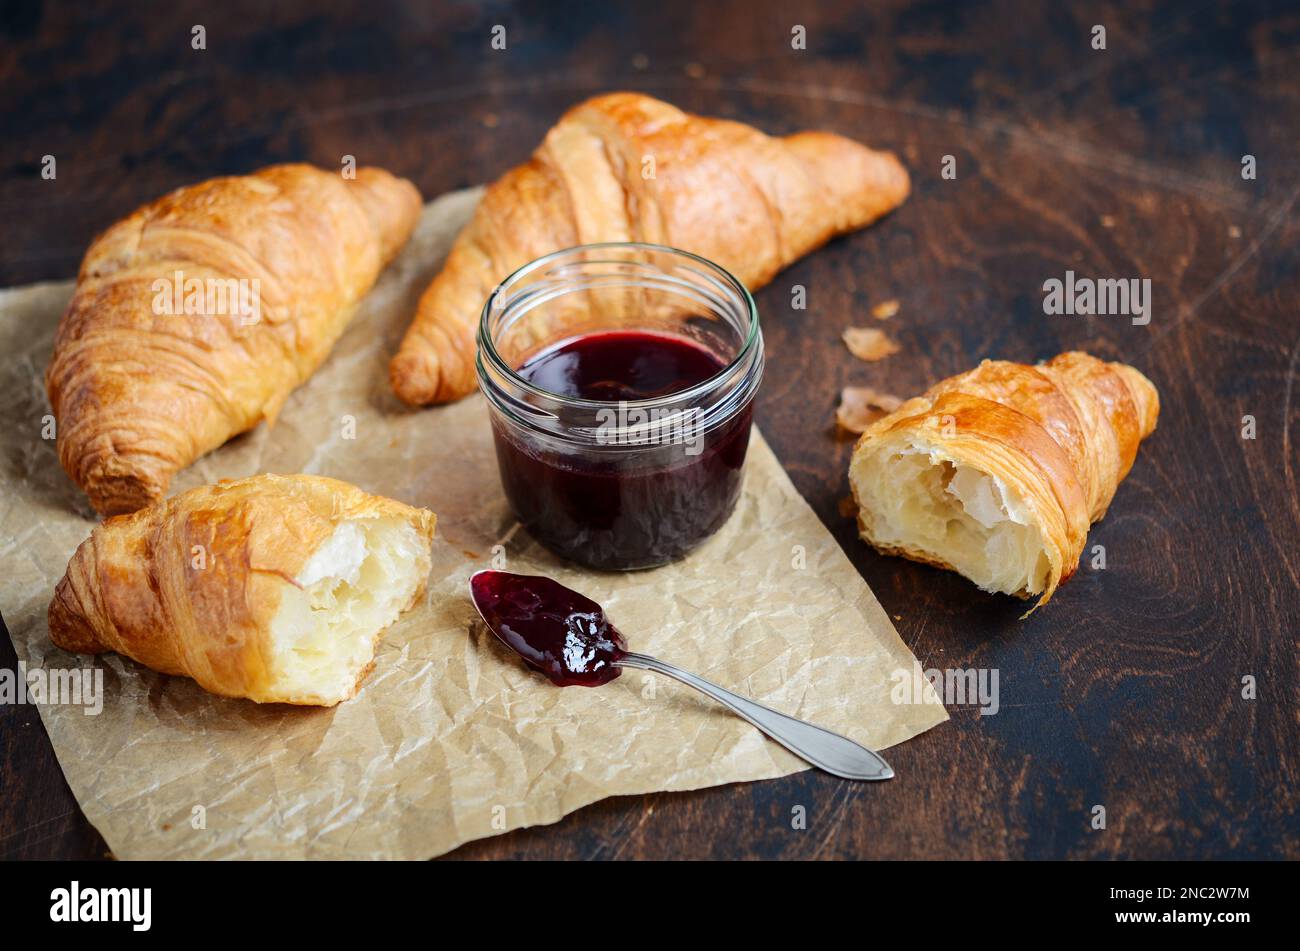 Freshly baked croissants with jam on dark wooden background. Stock Photo